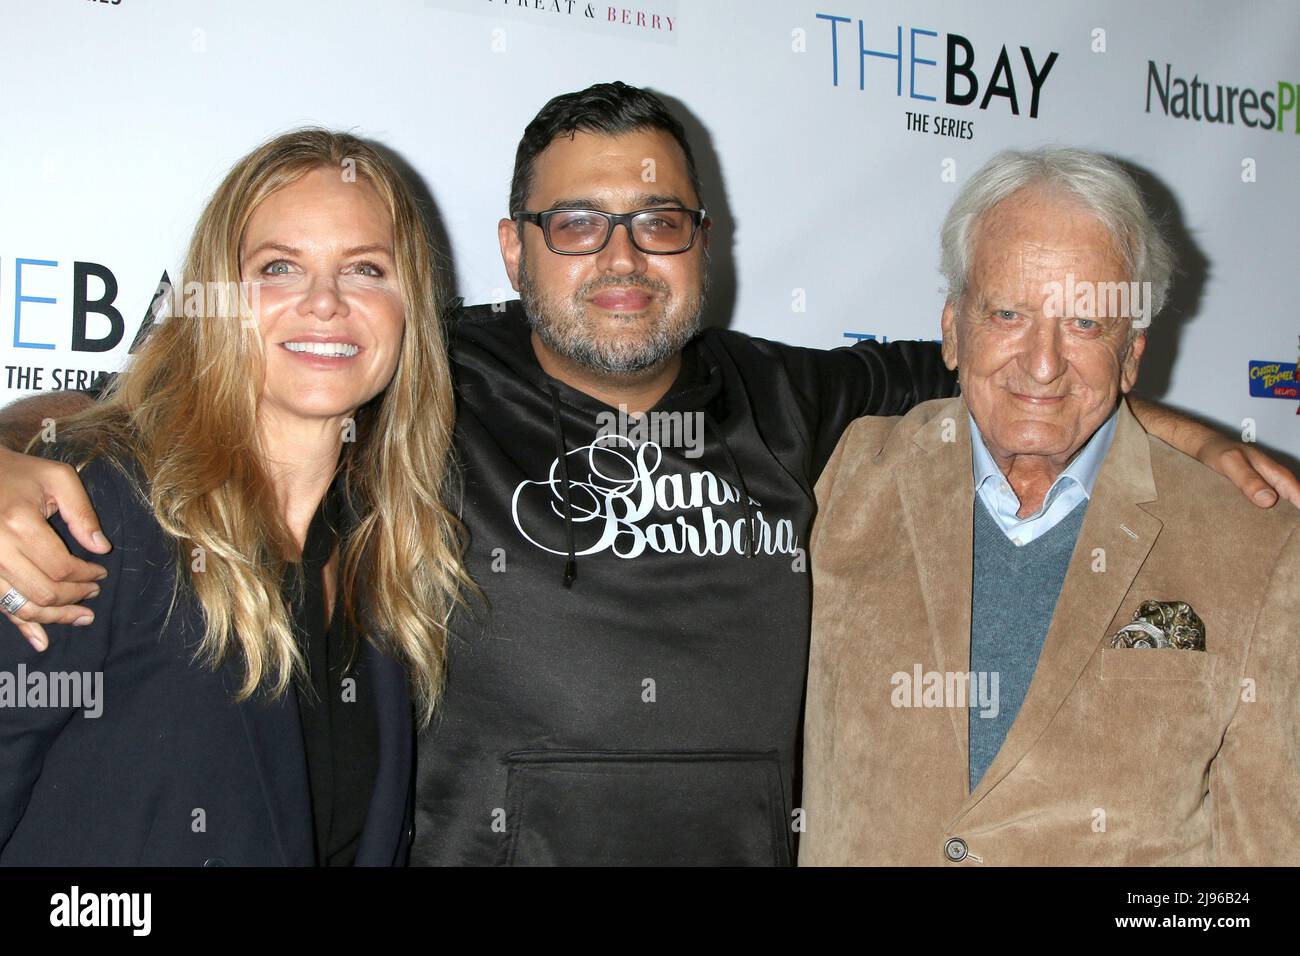 The Bay's  Season Finale Screening at the Private Residence on May 8, 2021 in Los Angeles, CA Featuring: Carrington Garland, Gregori  J Martin, and Nicolas Coster Where: Los Angeles, California, United States When: 09 May 2021 Credit: Nicky Nelson/WENN.com Stock Photo